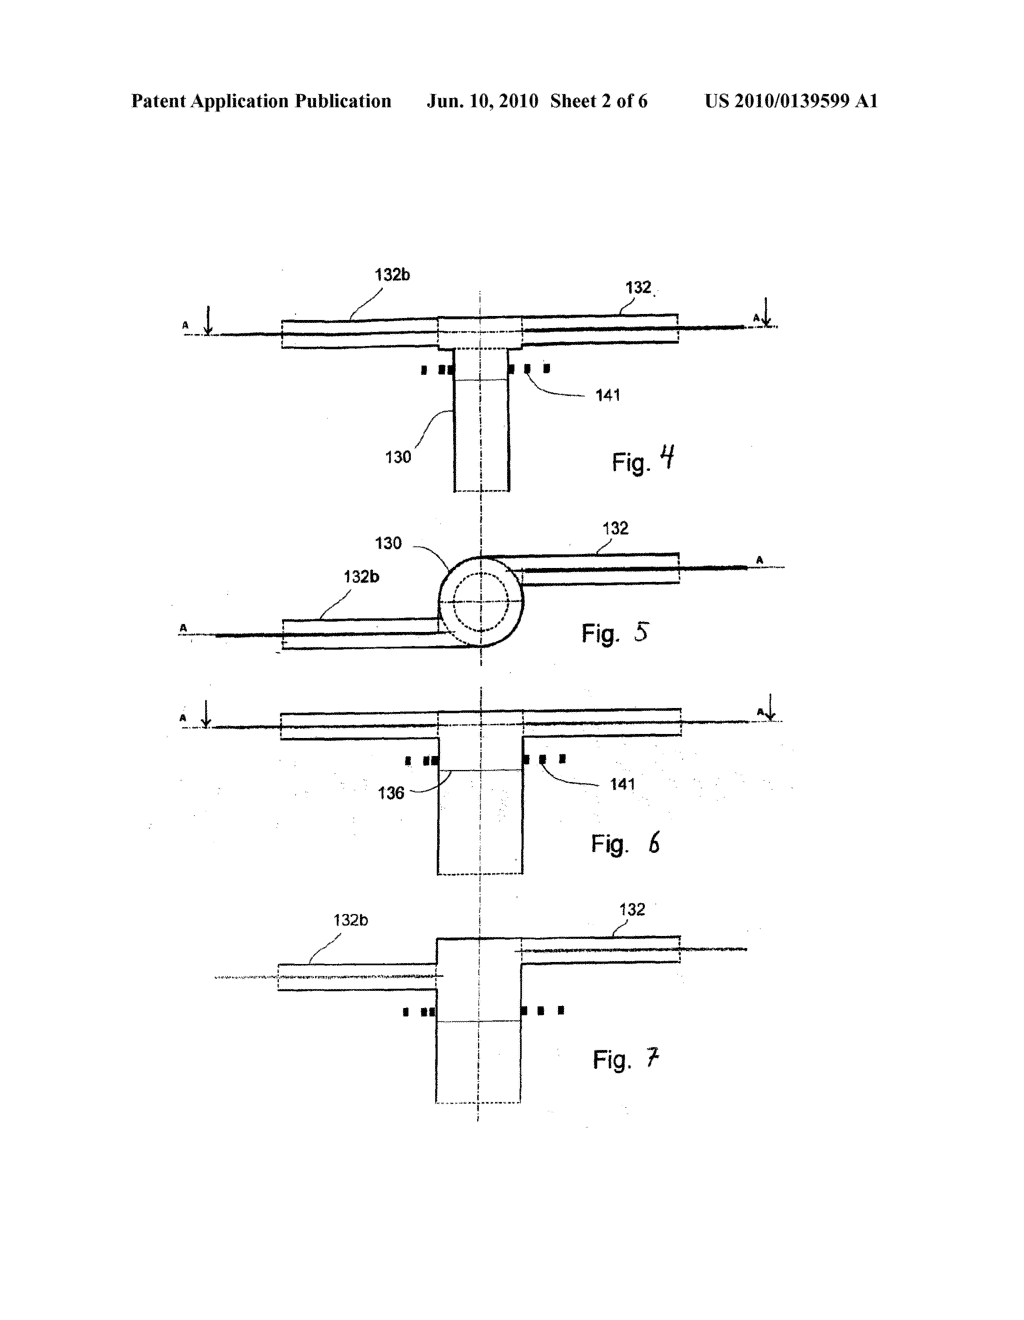  HEATING DEVICE INCLUDING CATALYTIC BURNING OF LIQUID FUEL - diagram, schematic, and image 03